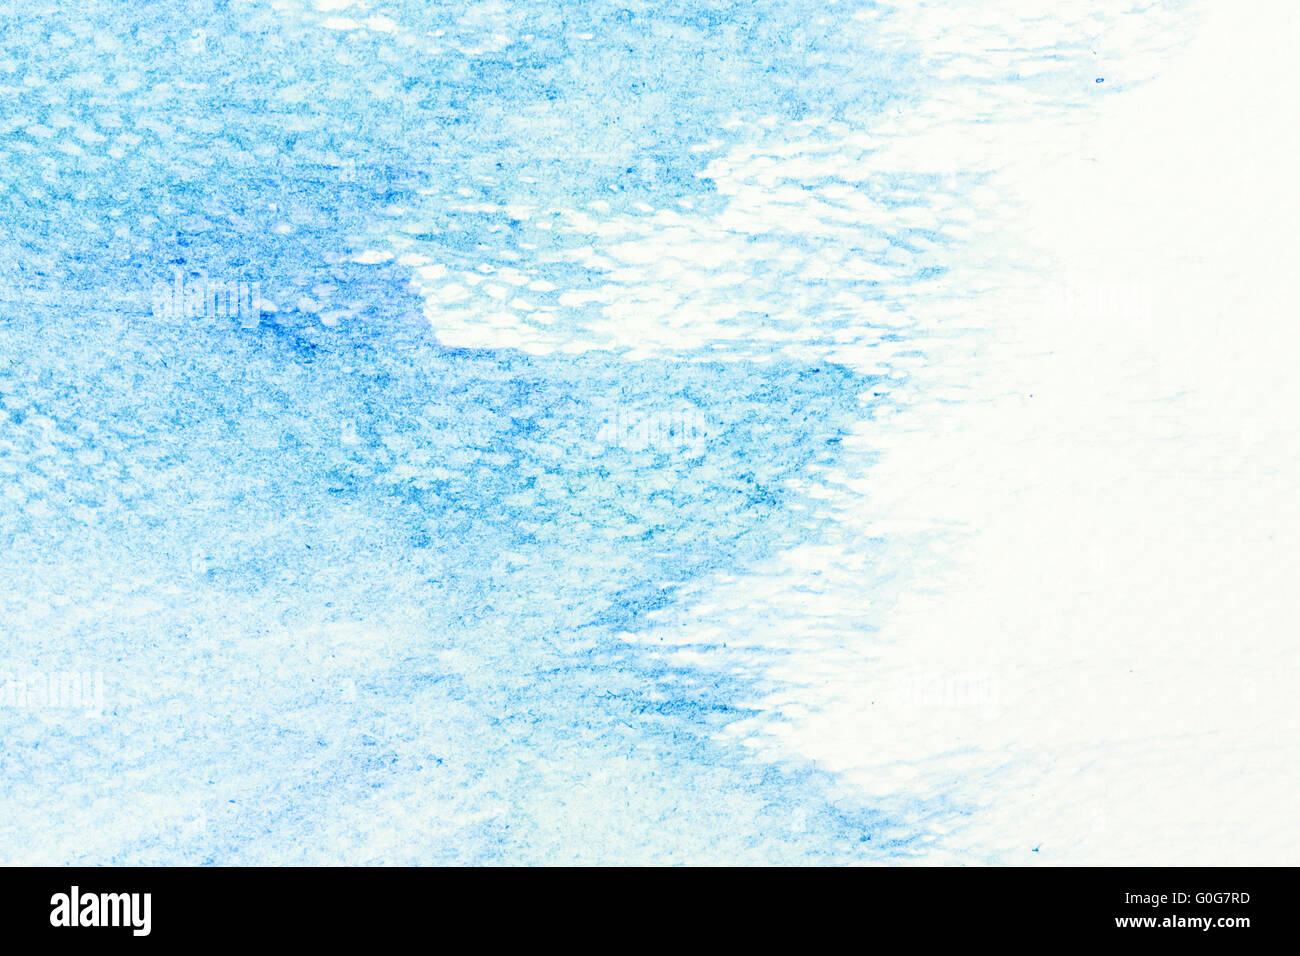 Blue watercolor paint on canvas. Abstract art background. Stock Photo